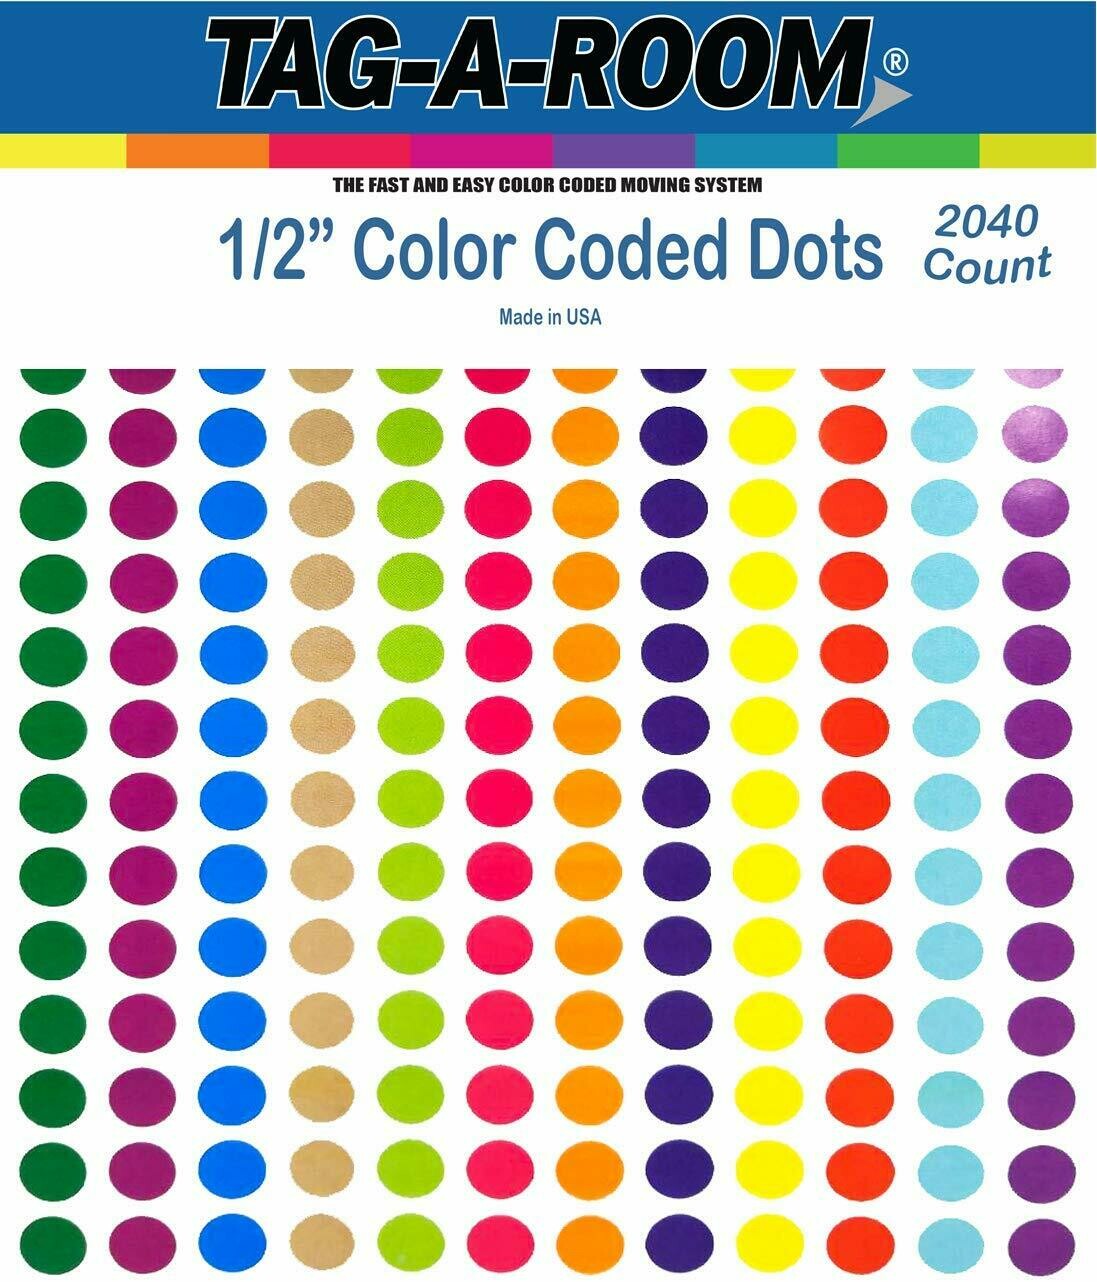 Tag-A-Room 1/2 Inch Round Color Coding Circle Dot Sticker Labels, 12 Bright Colors, 8 1/2" x 11" Sheet (2040 Pack)